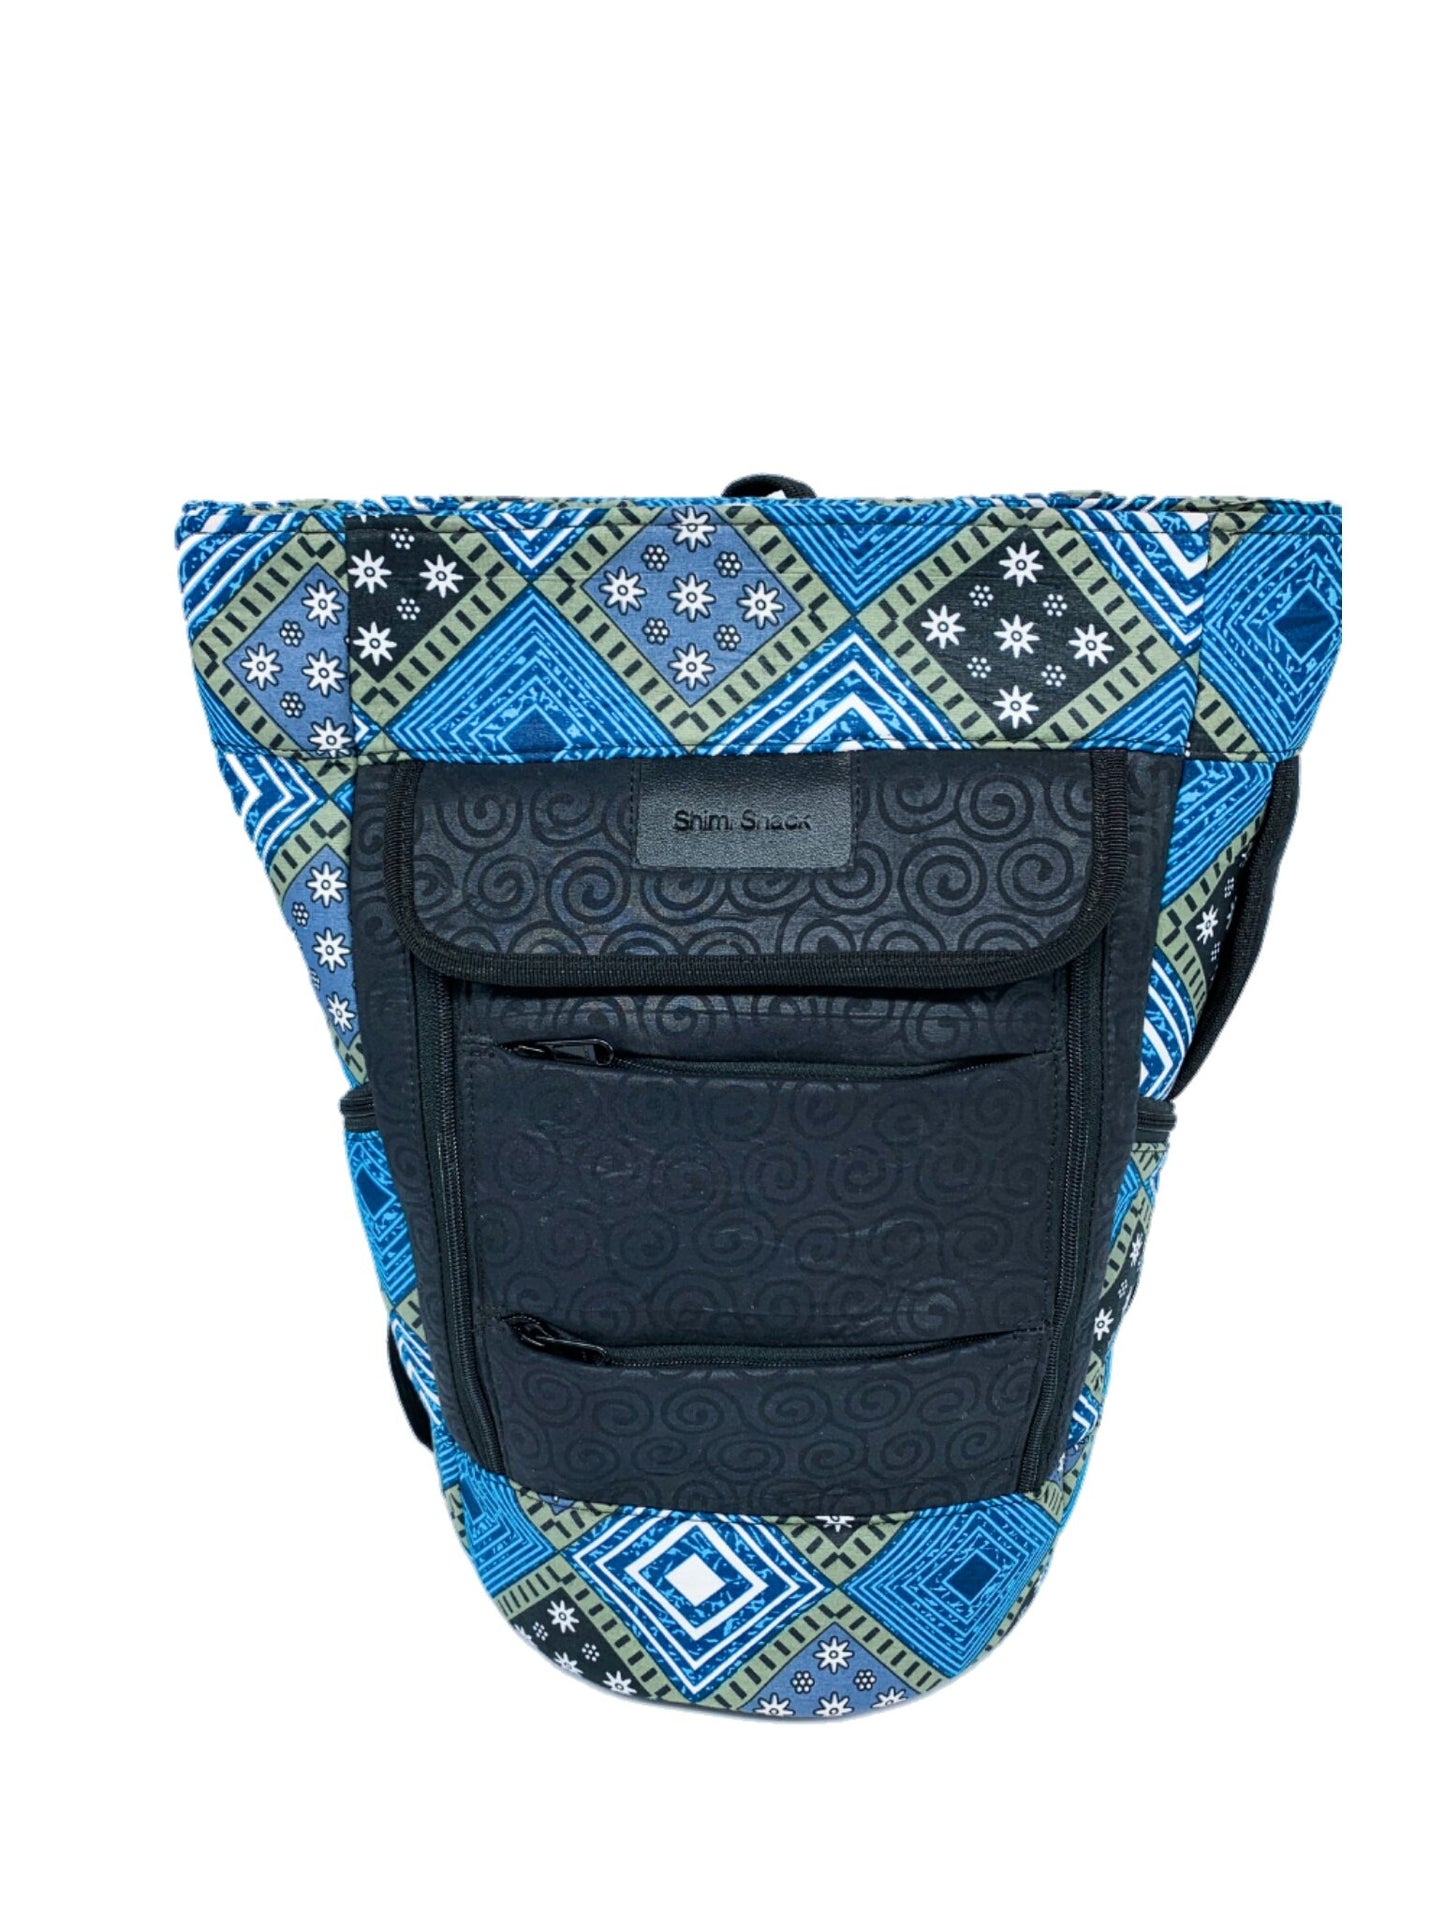 Bea Handcrafted Ankara  Backpack: Boho Style with Plenty of Room for Adventure